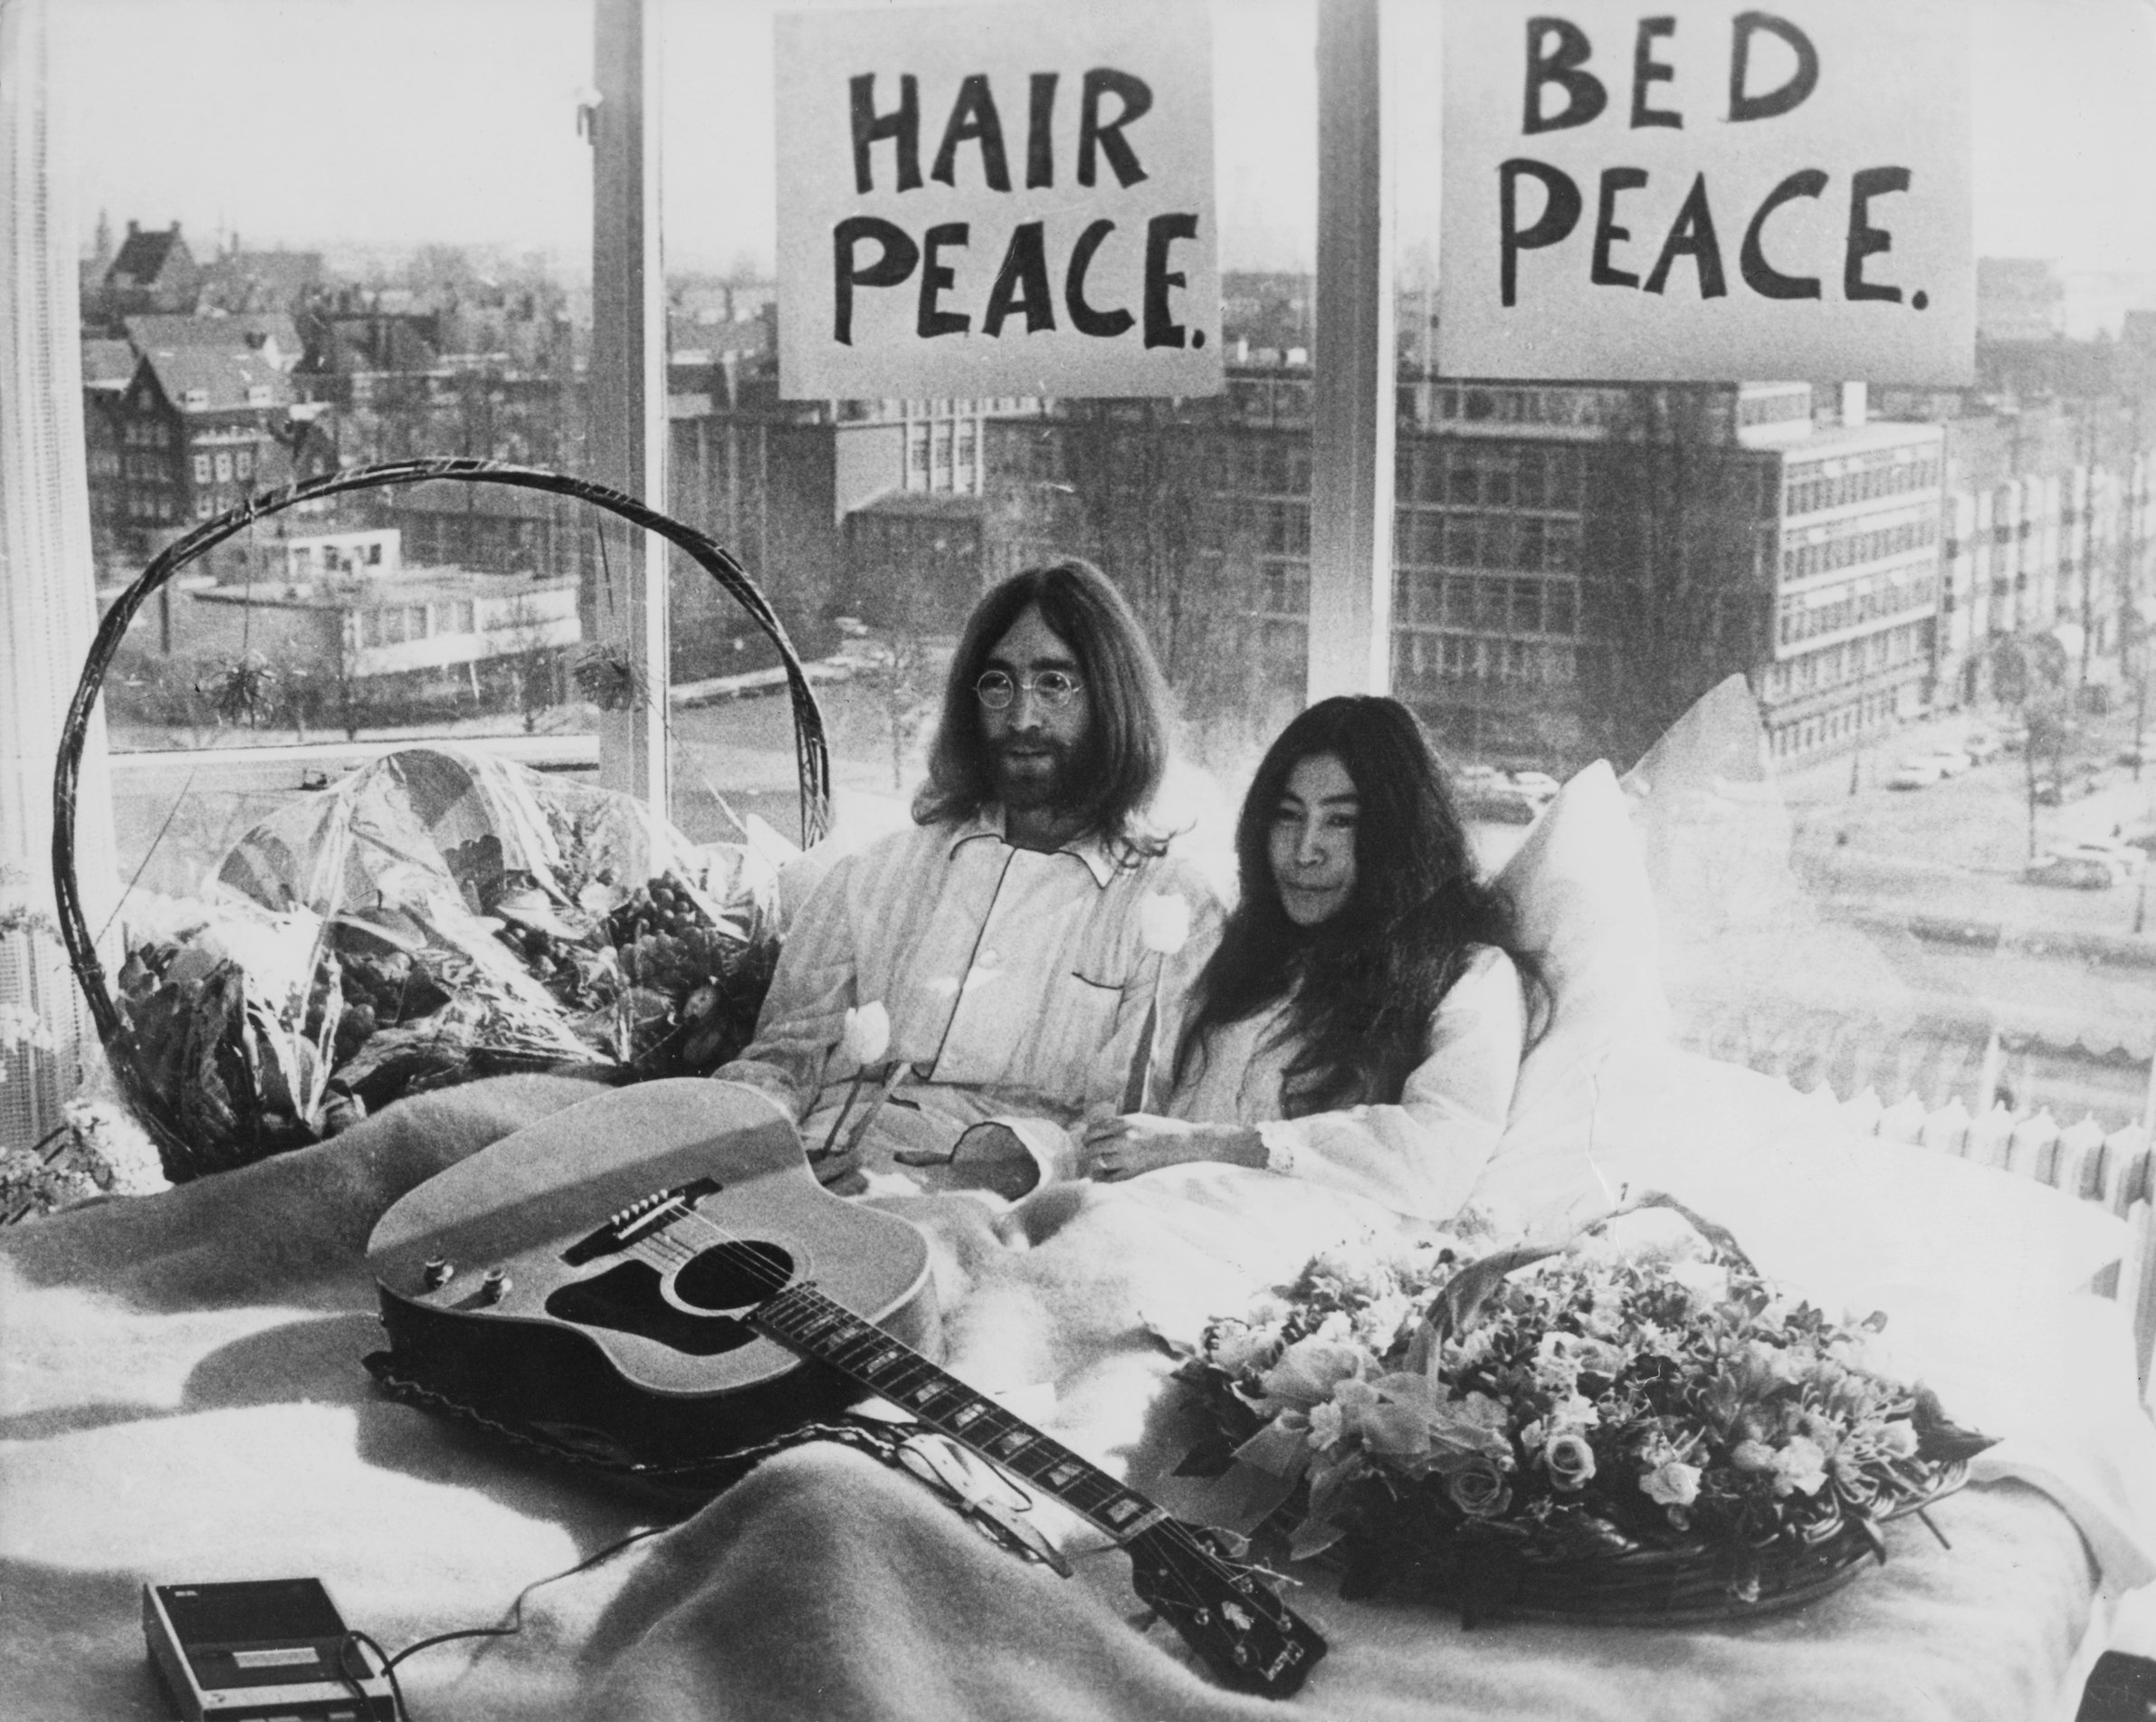 John Lennon and Yoko Ono Began Their ‘Bed-in’ 54 Years Ago, Promoting Peace to the World